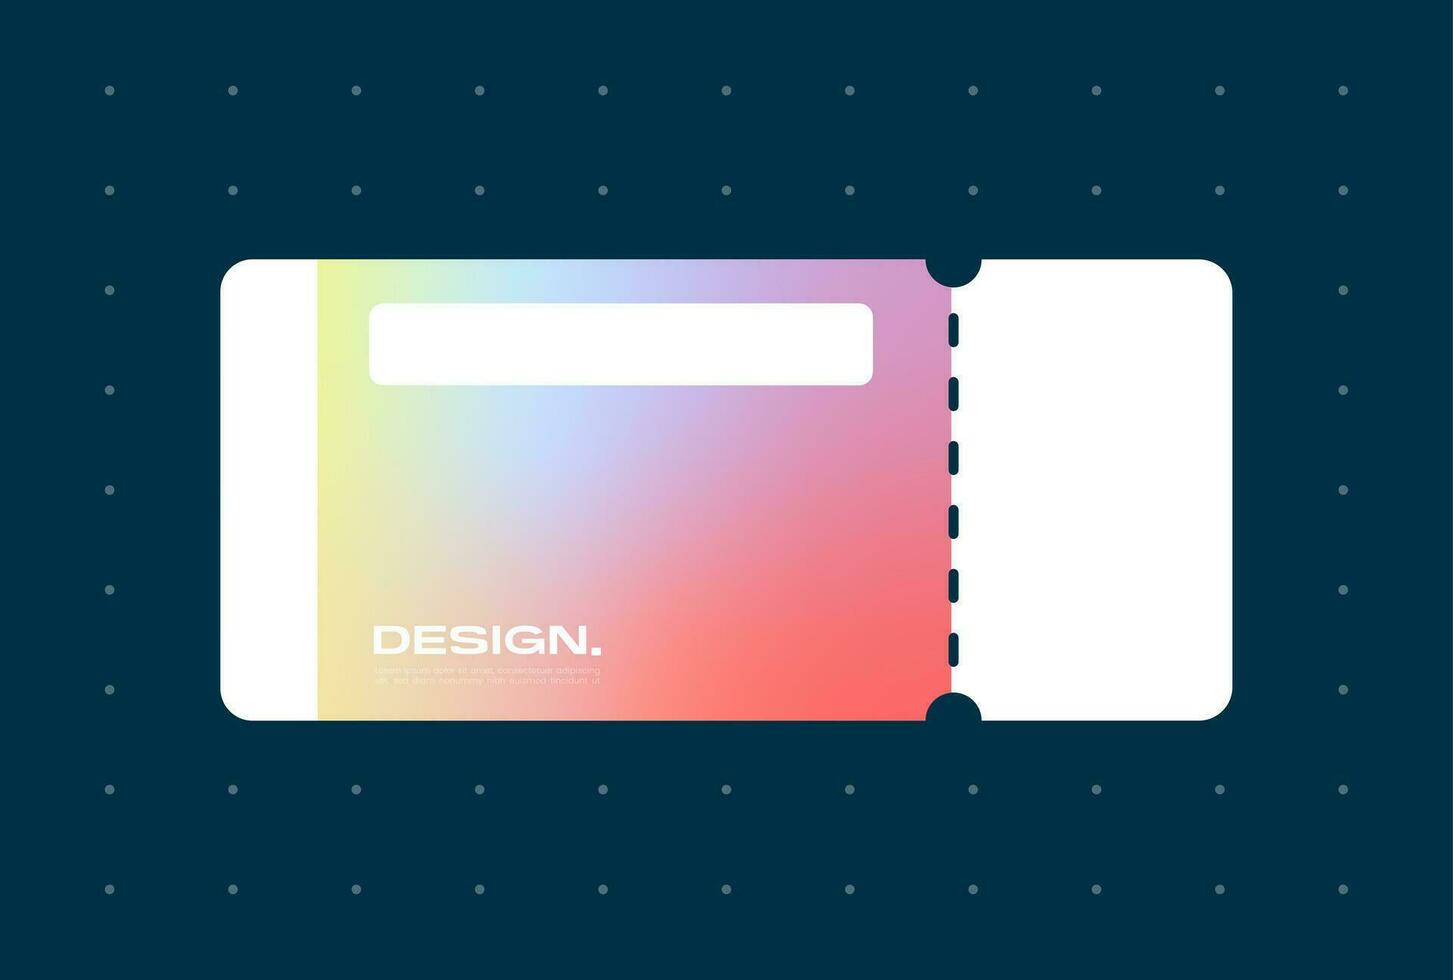 Voucher claim pop up in gradient color style. Coupon template vector illustration.